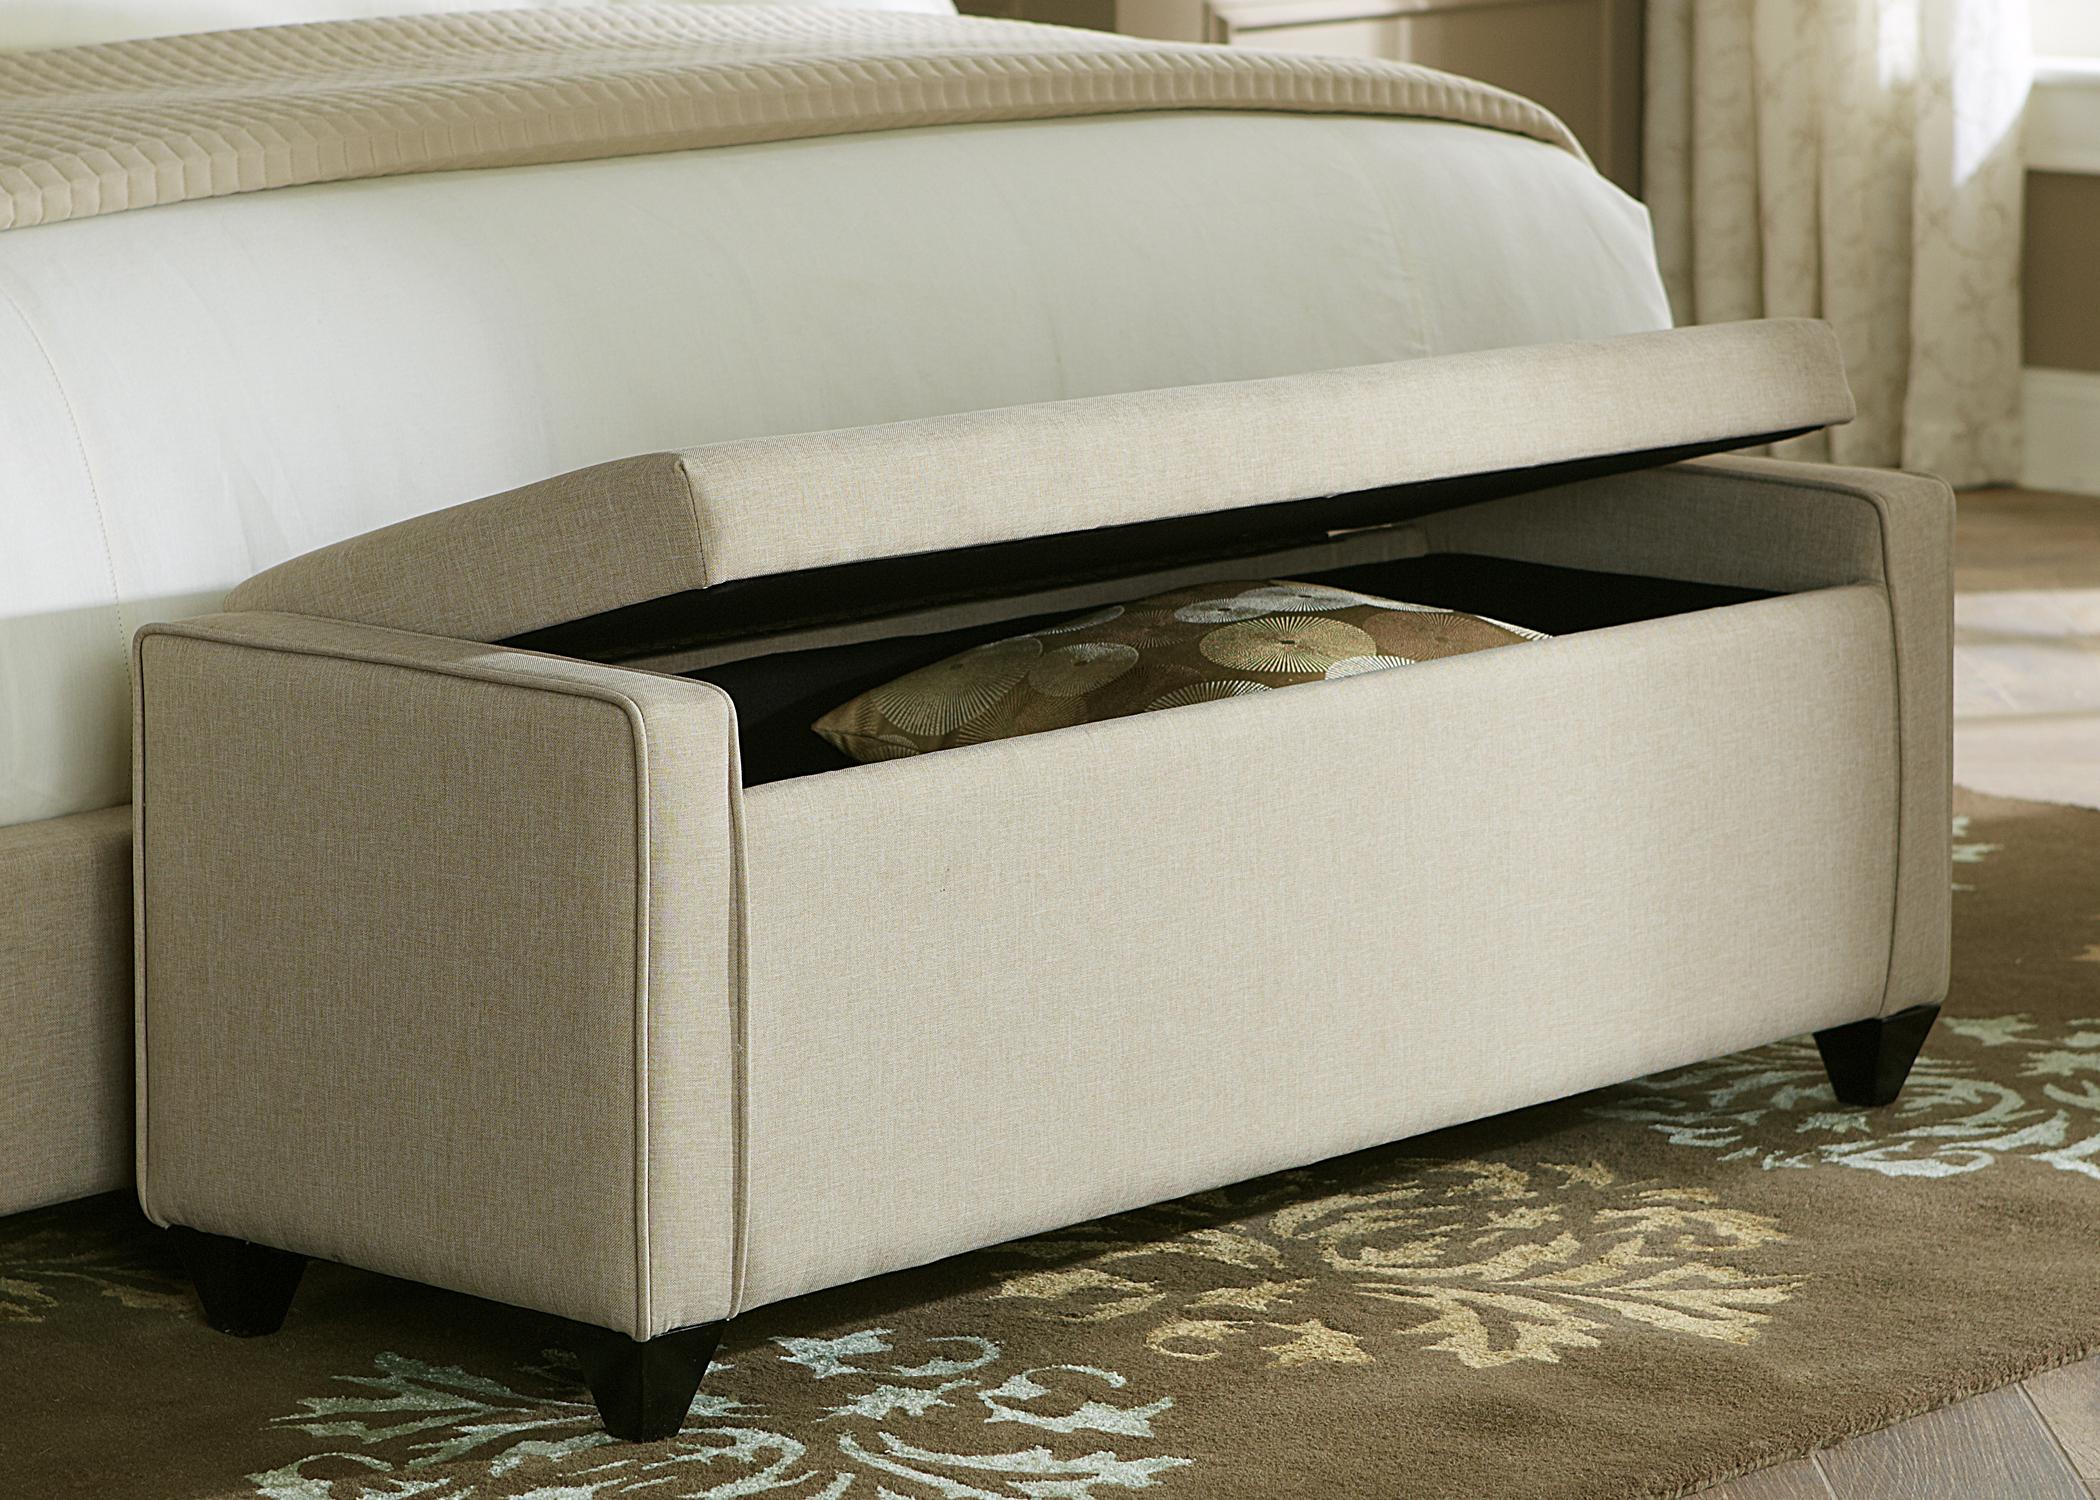 Why Every Bedroom Needs A Storage Bench